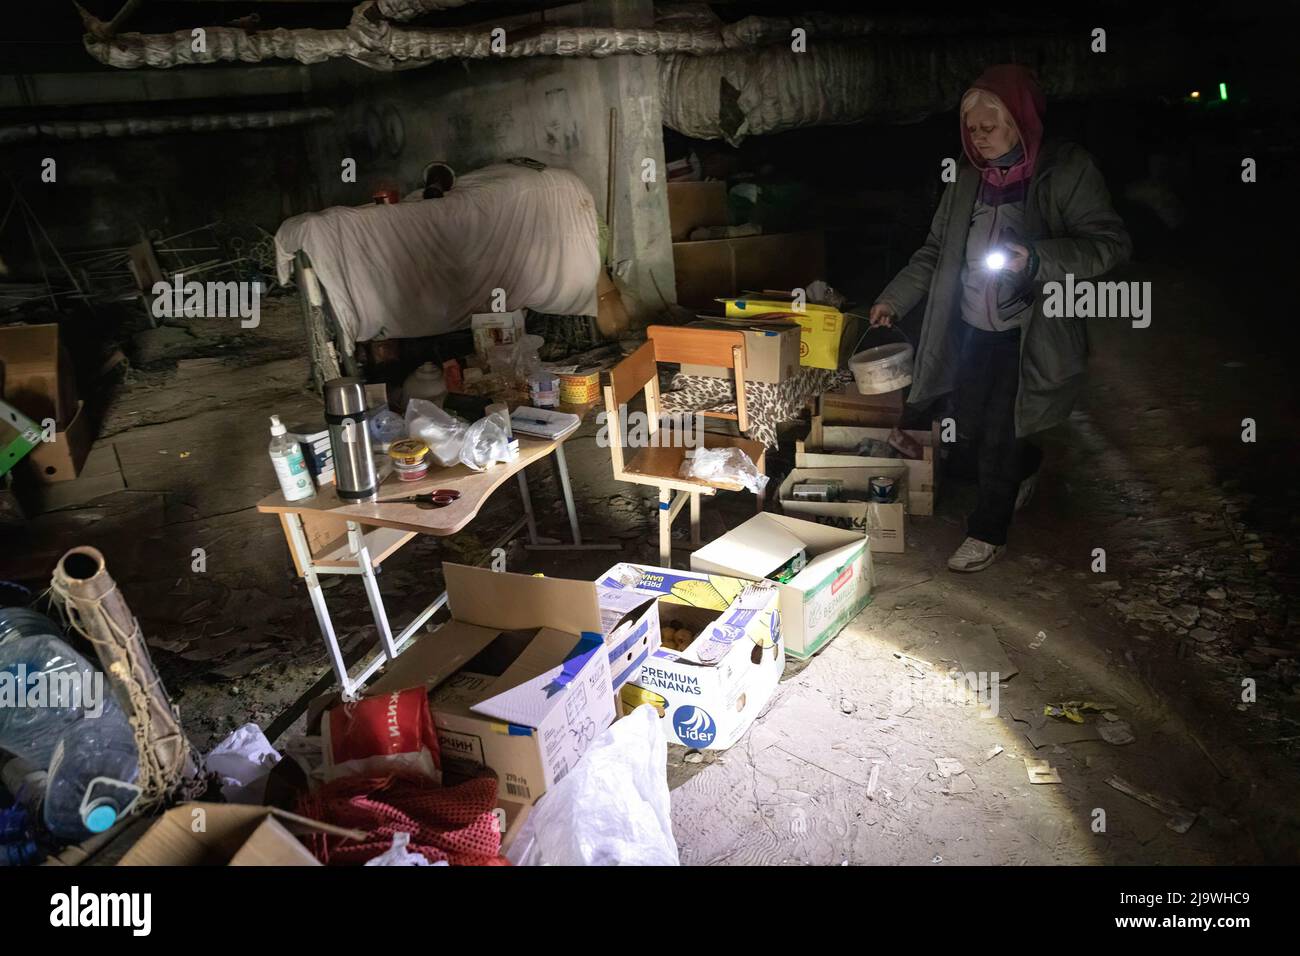 May 1, 2022, Kharkiv, KharkivsÃ-ka OblastÃ, Ukraine: An old lady searches for food in the card boxes while holding a flashlight in the underground bunker in Kharkiv. A former school now turned into a bunker, as it holds more than 100 citizens living in Saltivka district in Kharkiv, who have been forced to adopt to a new life underground in bunkers without electricity and water under constant heavy shelling of Russian bombardment and airstrikes. (Credit Image: © Alex Chan Tsz Yuk/SOPA Images via ZUMA Press Wire) Stock Photo